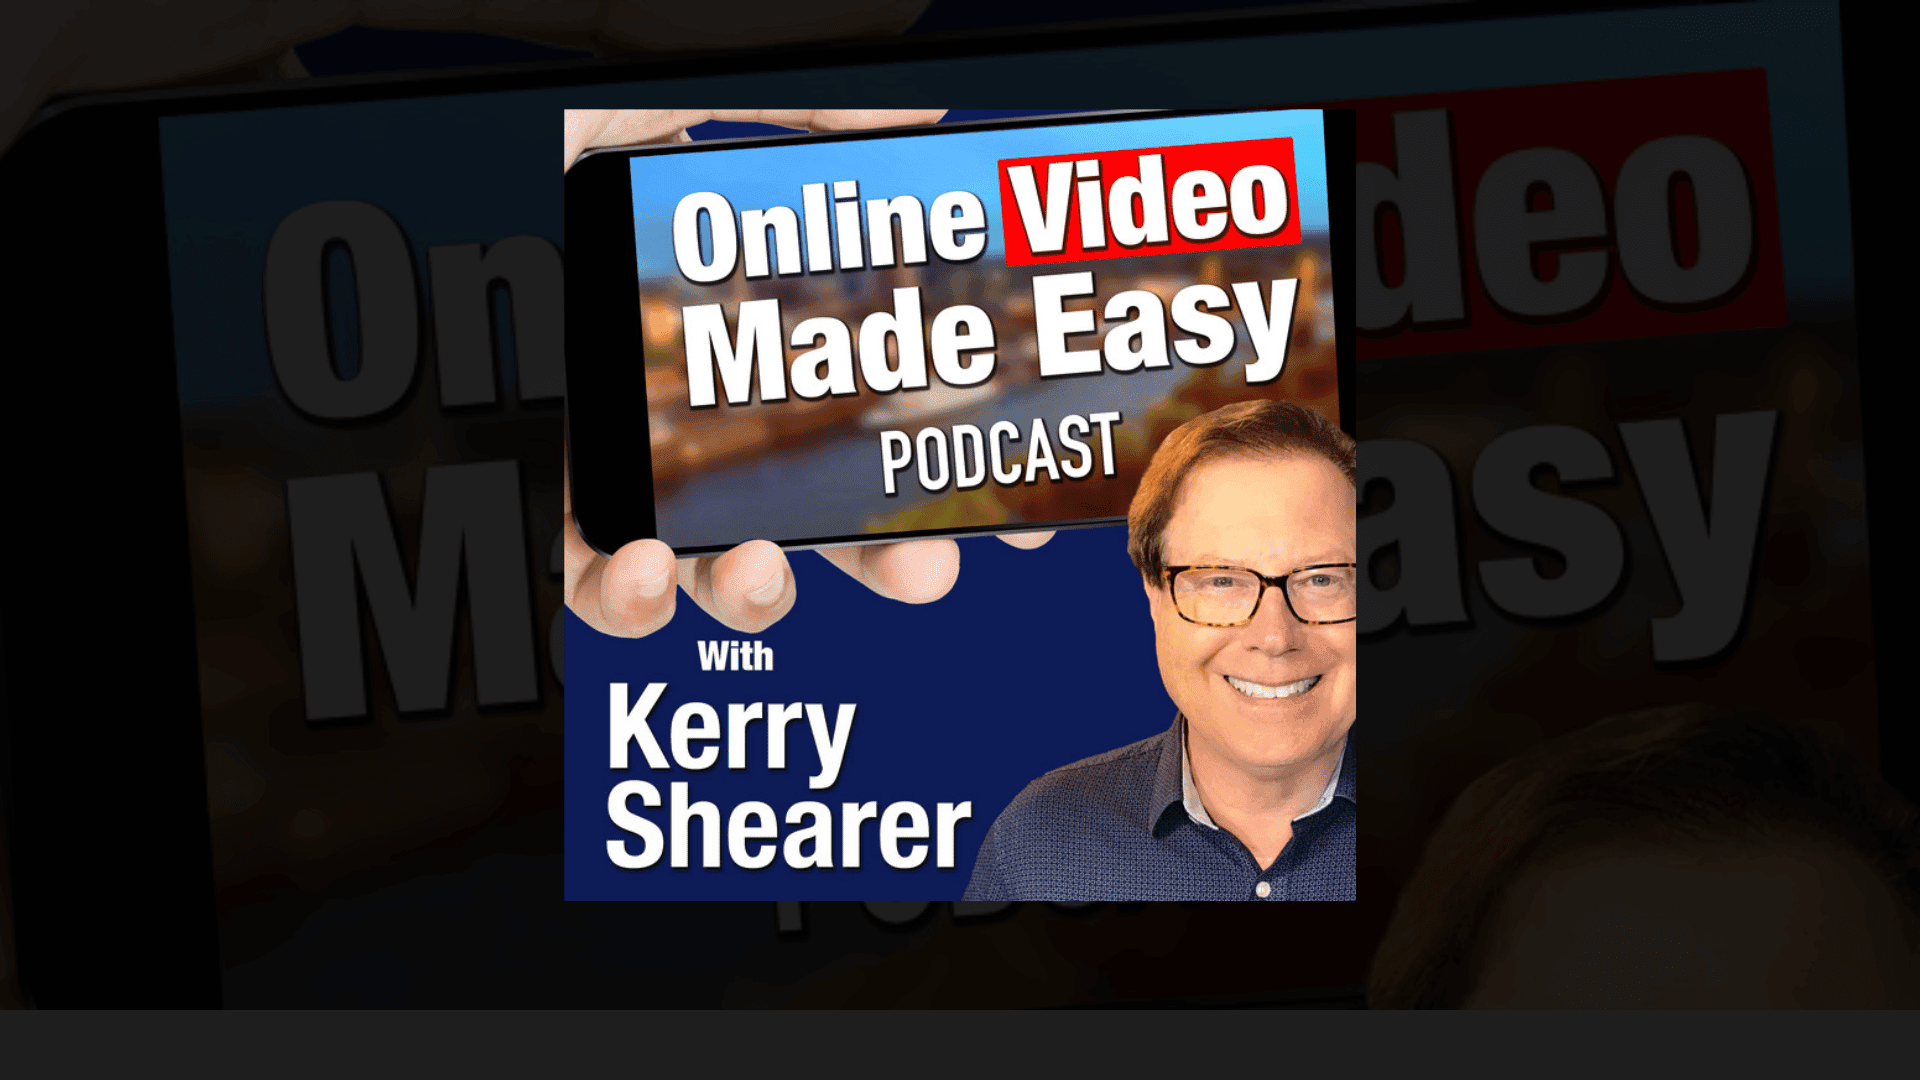 Online Video Made Easy Podcast